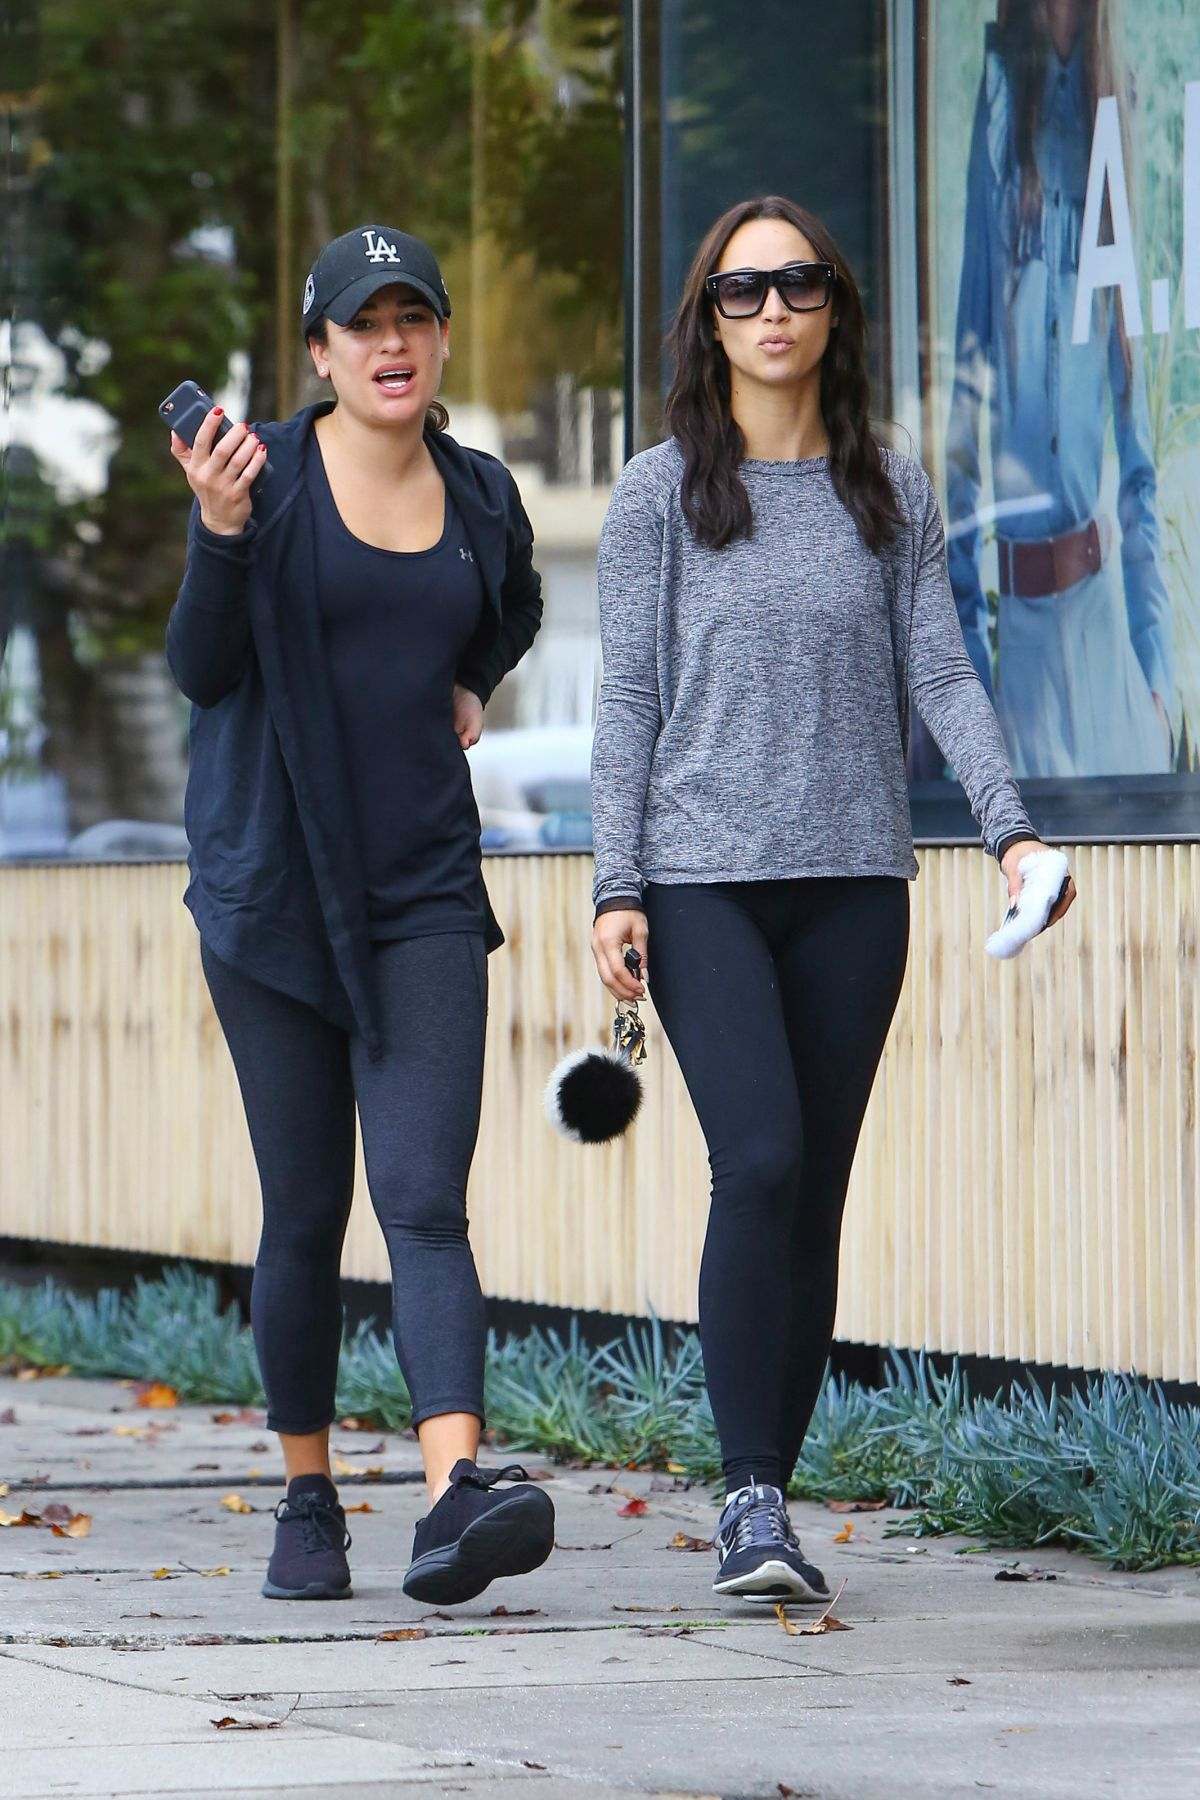 Lea Michele and Cara Santana out and about in Beverly Hills on 01.07.17.